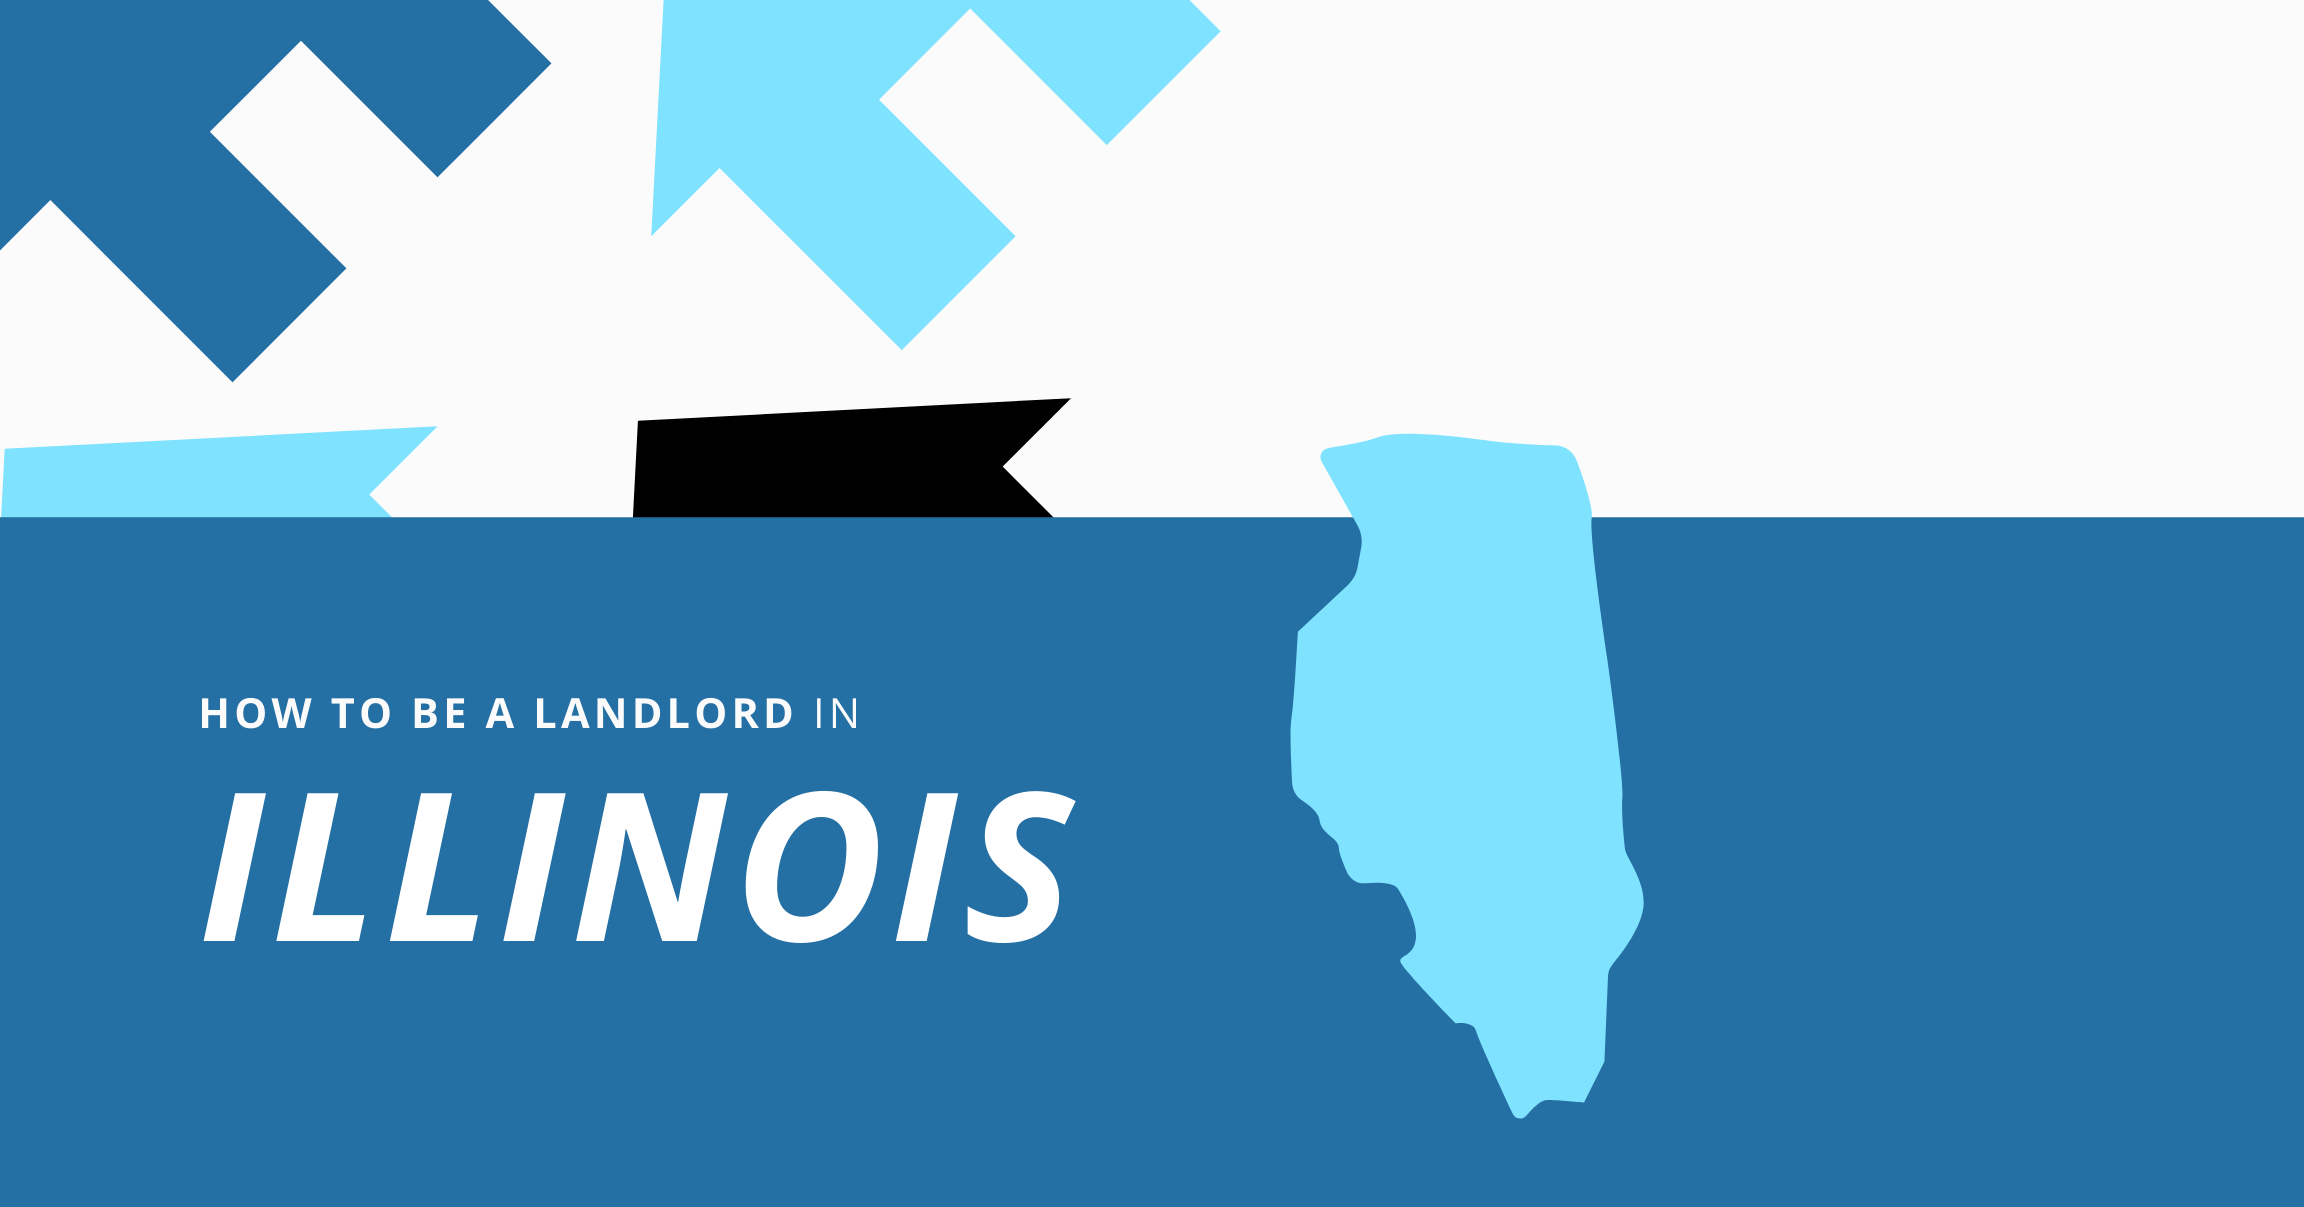 How to be a landlord in Illinois